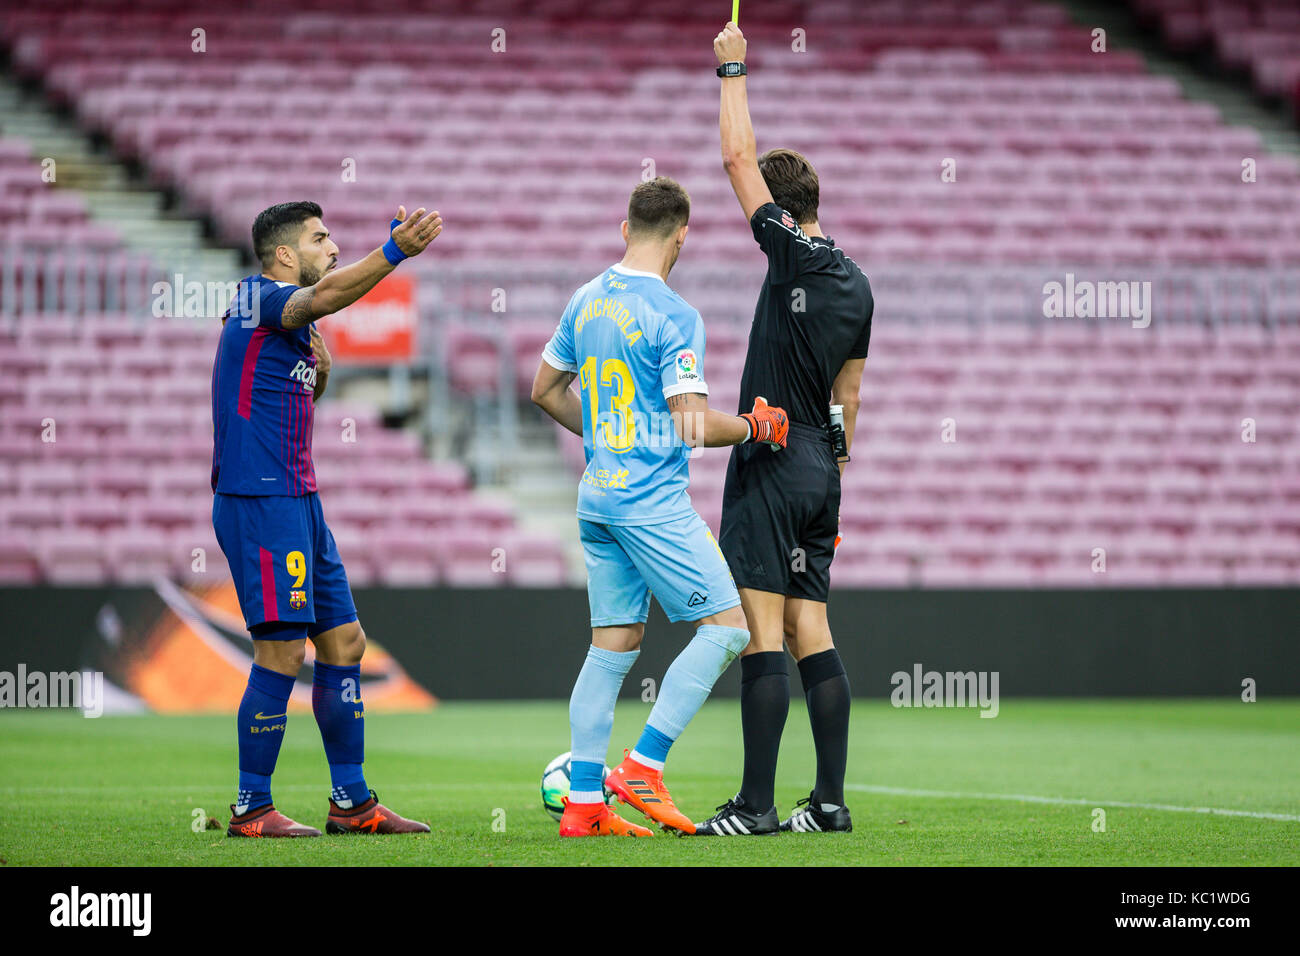 Barcelona, Spain. 1st October, 2017. The referee shows the yellow card to Luis Suarez during the match between FC Barcelona against Las Palmas, for the round 7 of the Liga Santander, played at Camp Nou Stadium on 1th October 2017 in Barcelona, Spain. Credit: Gtres Información más Comuniación on line, S.L./Alamy Live News Stock Photo